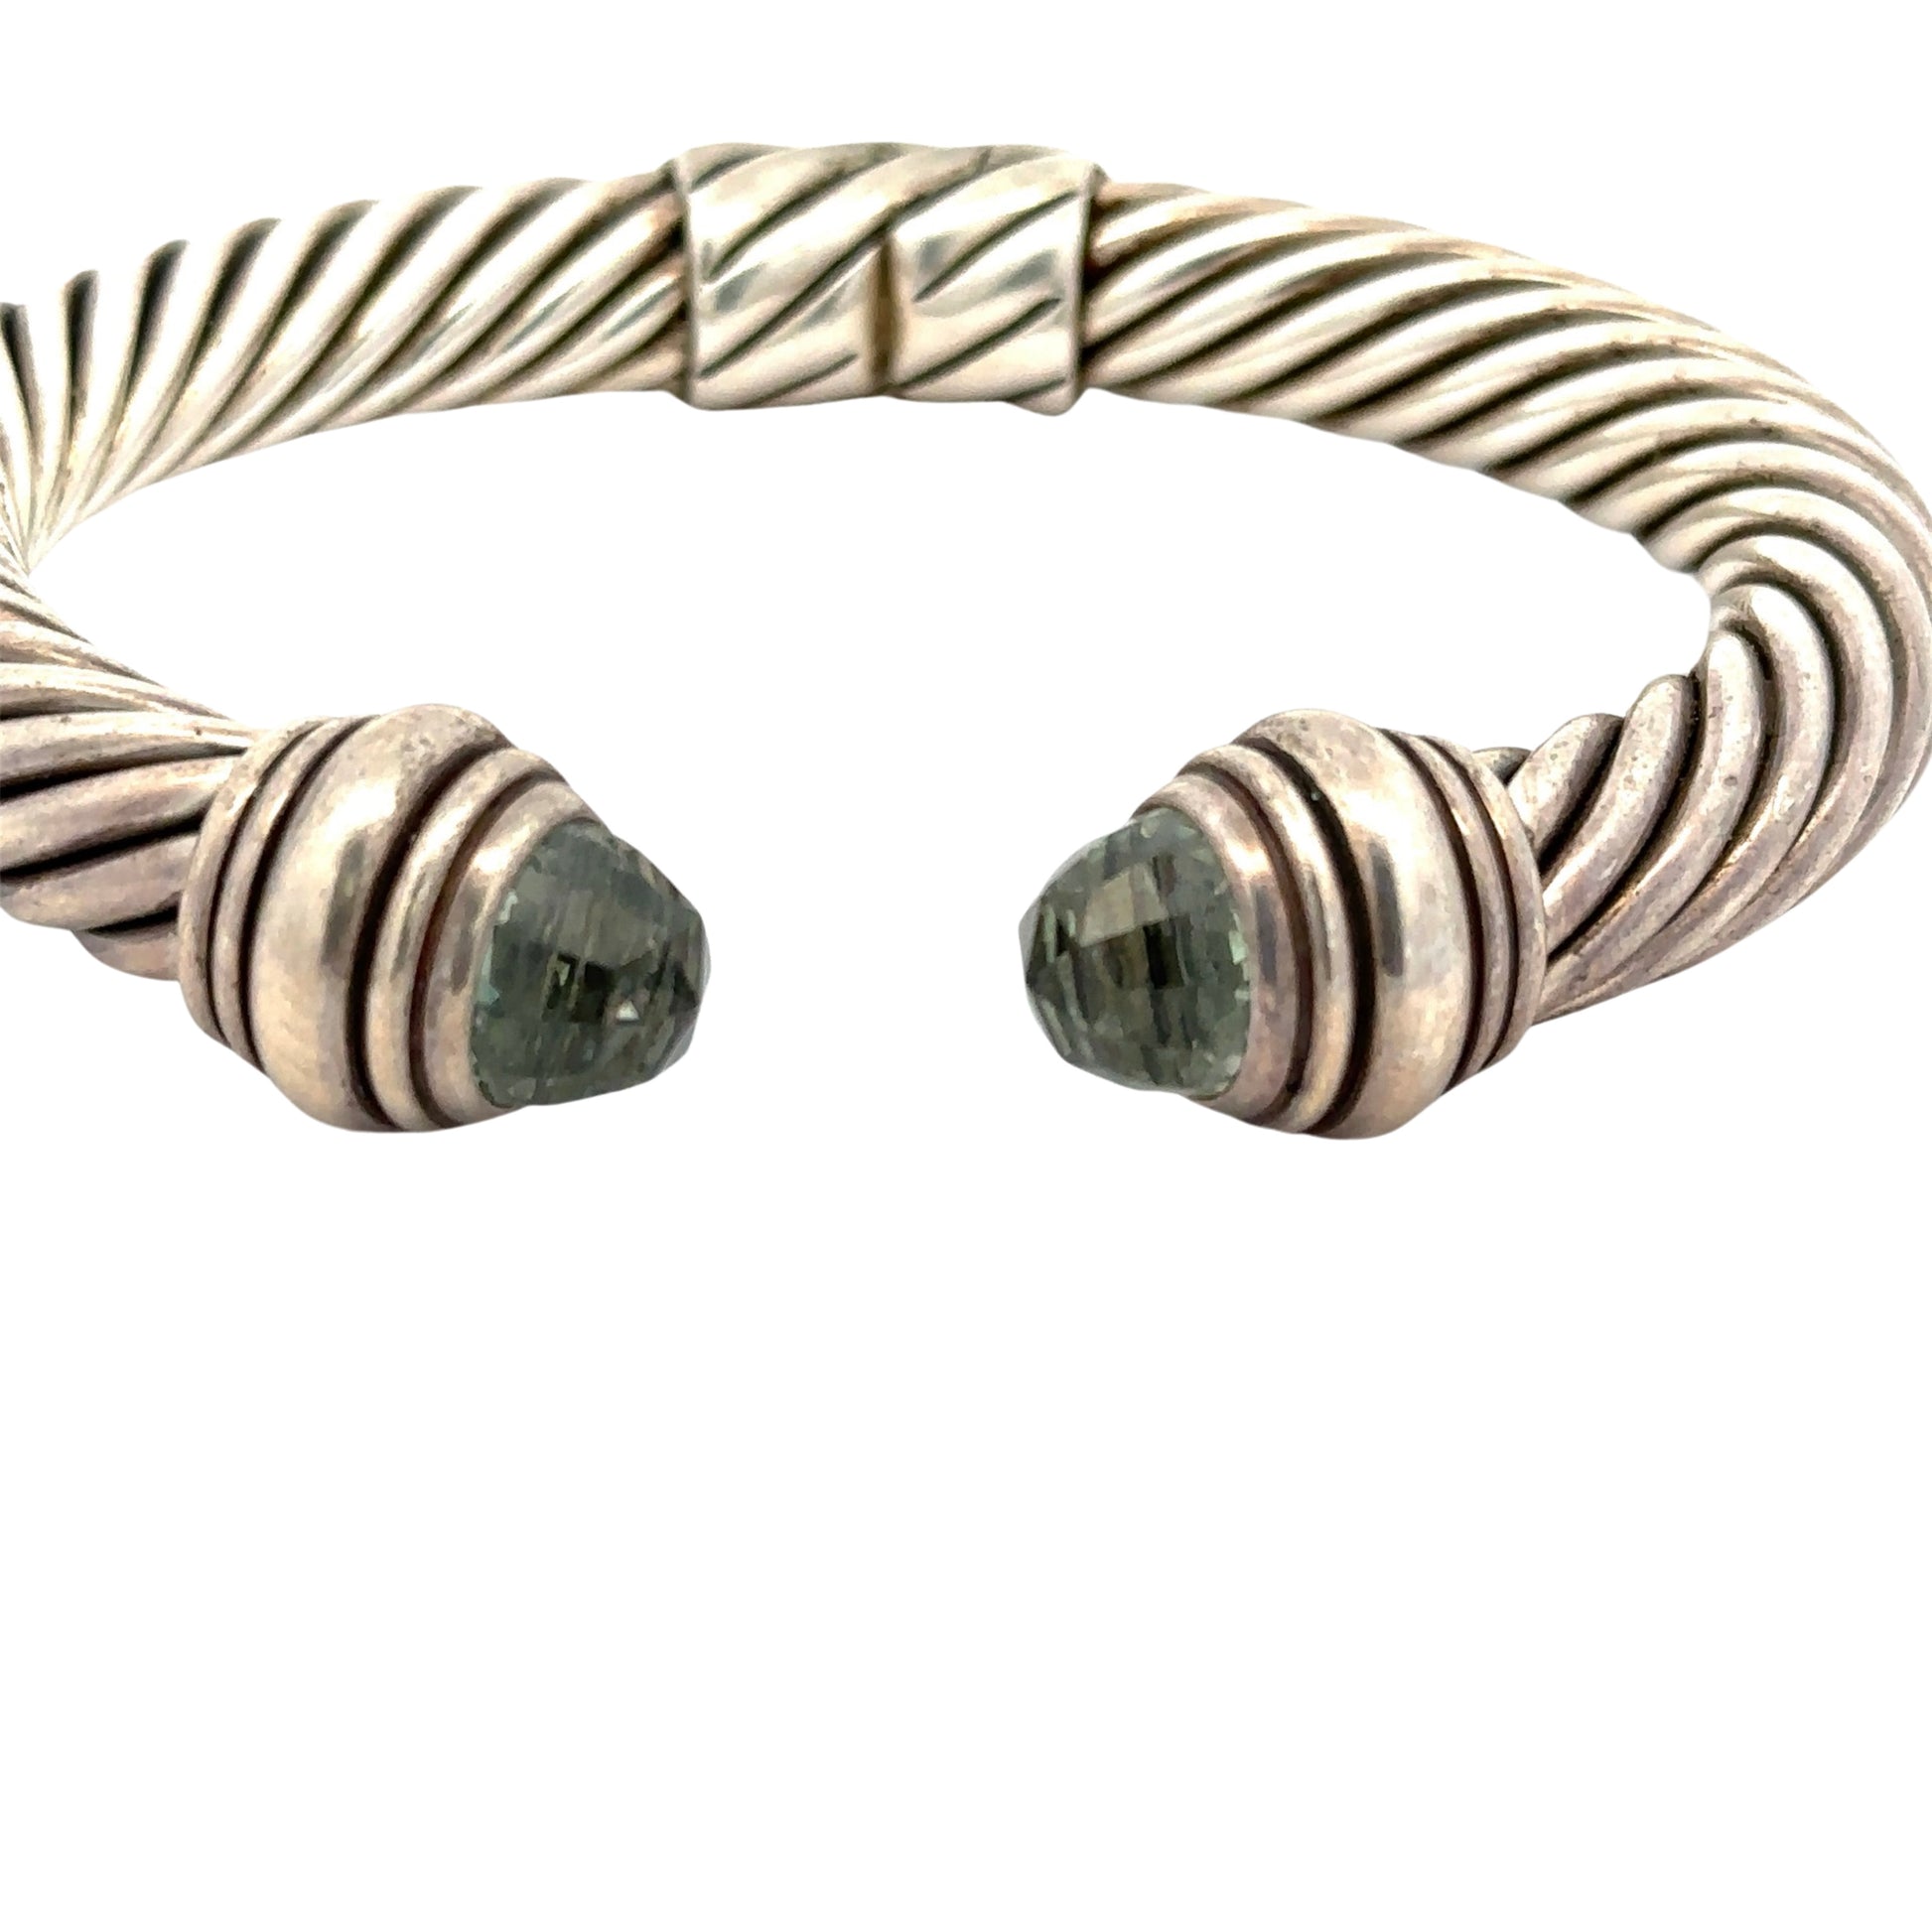 Front of open silver textured bracelet with 2 dome-shaped Prasiolite Gemstones- yellowish green color. Scratches on silver.